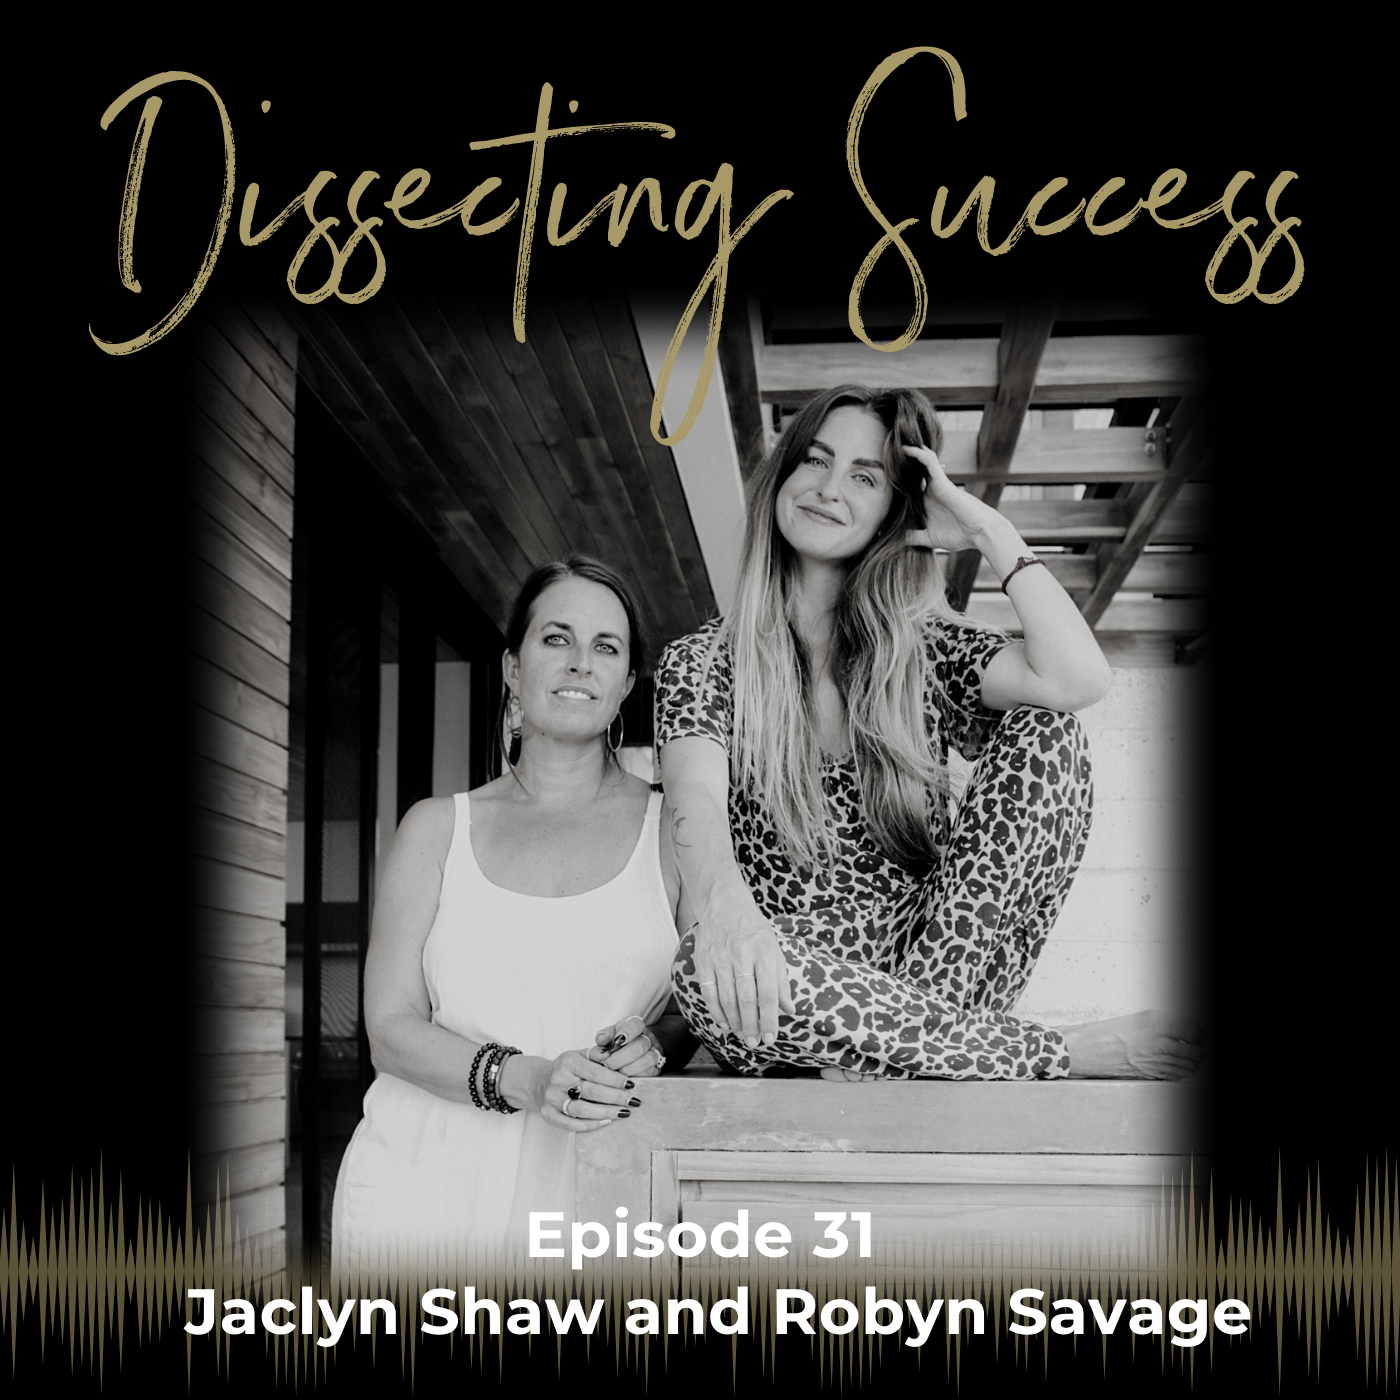 Artwork for podcast Dissecting Success